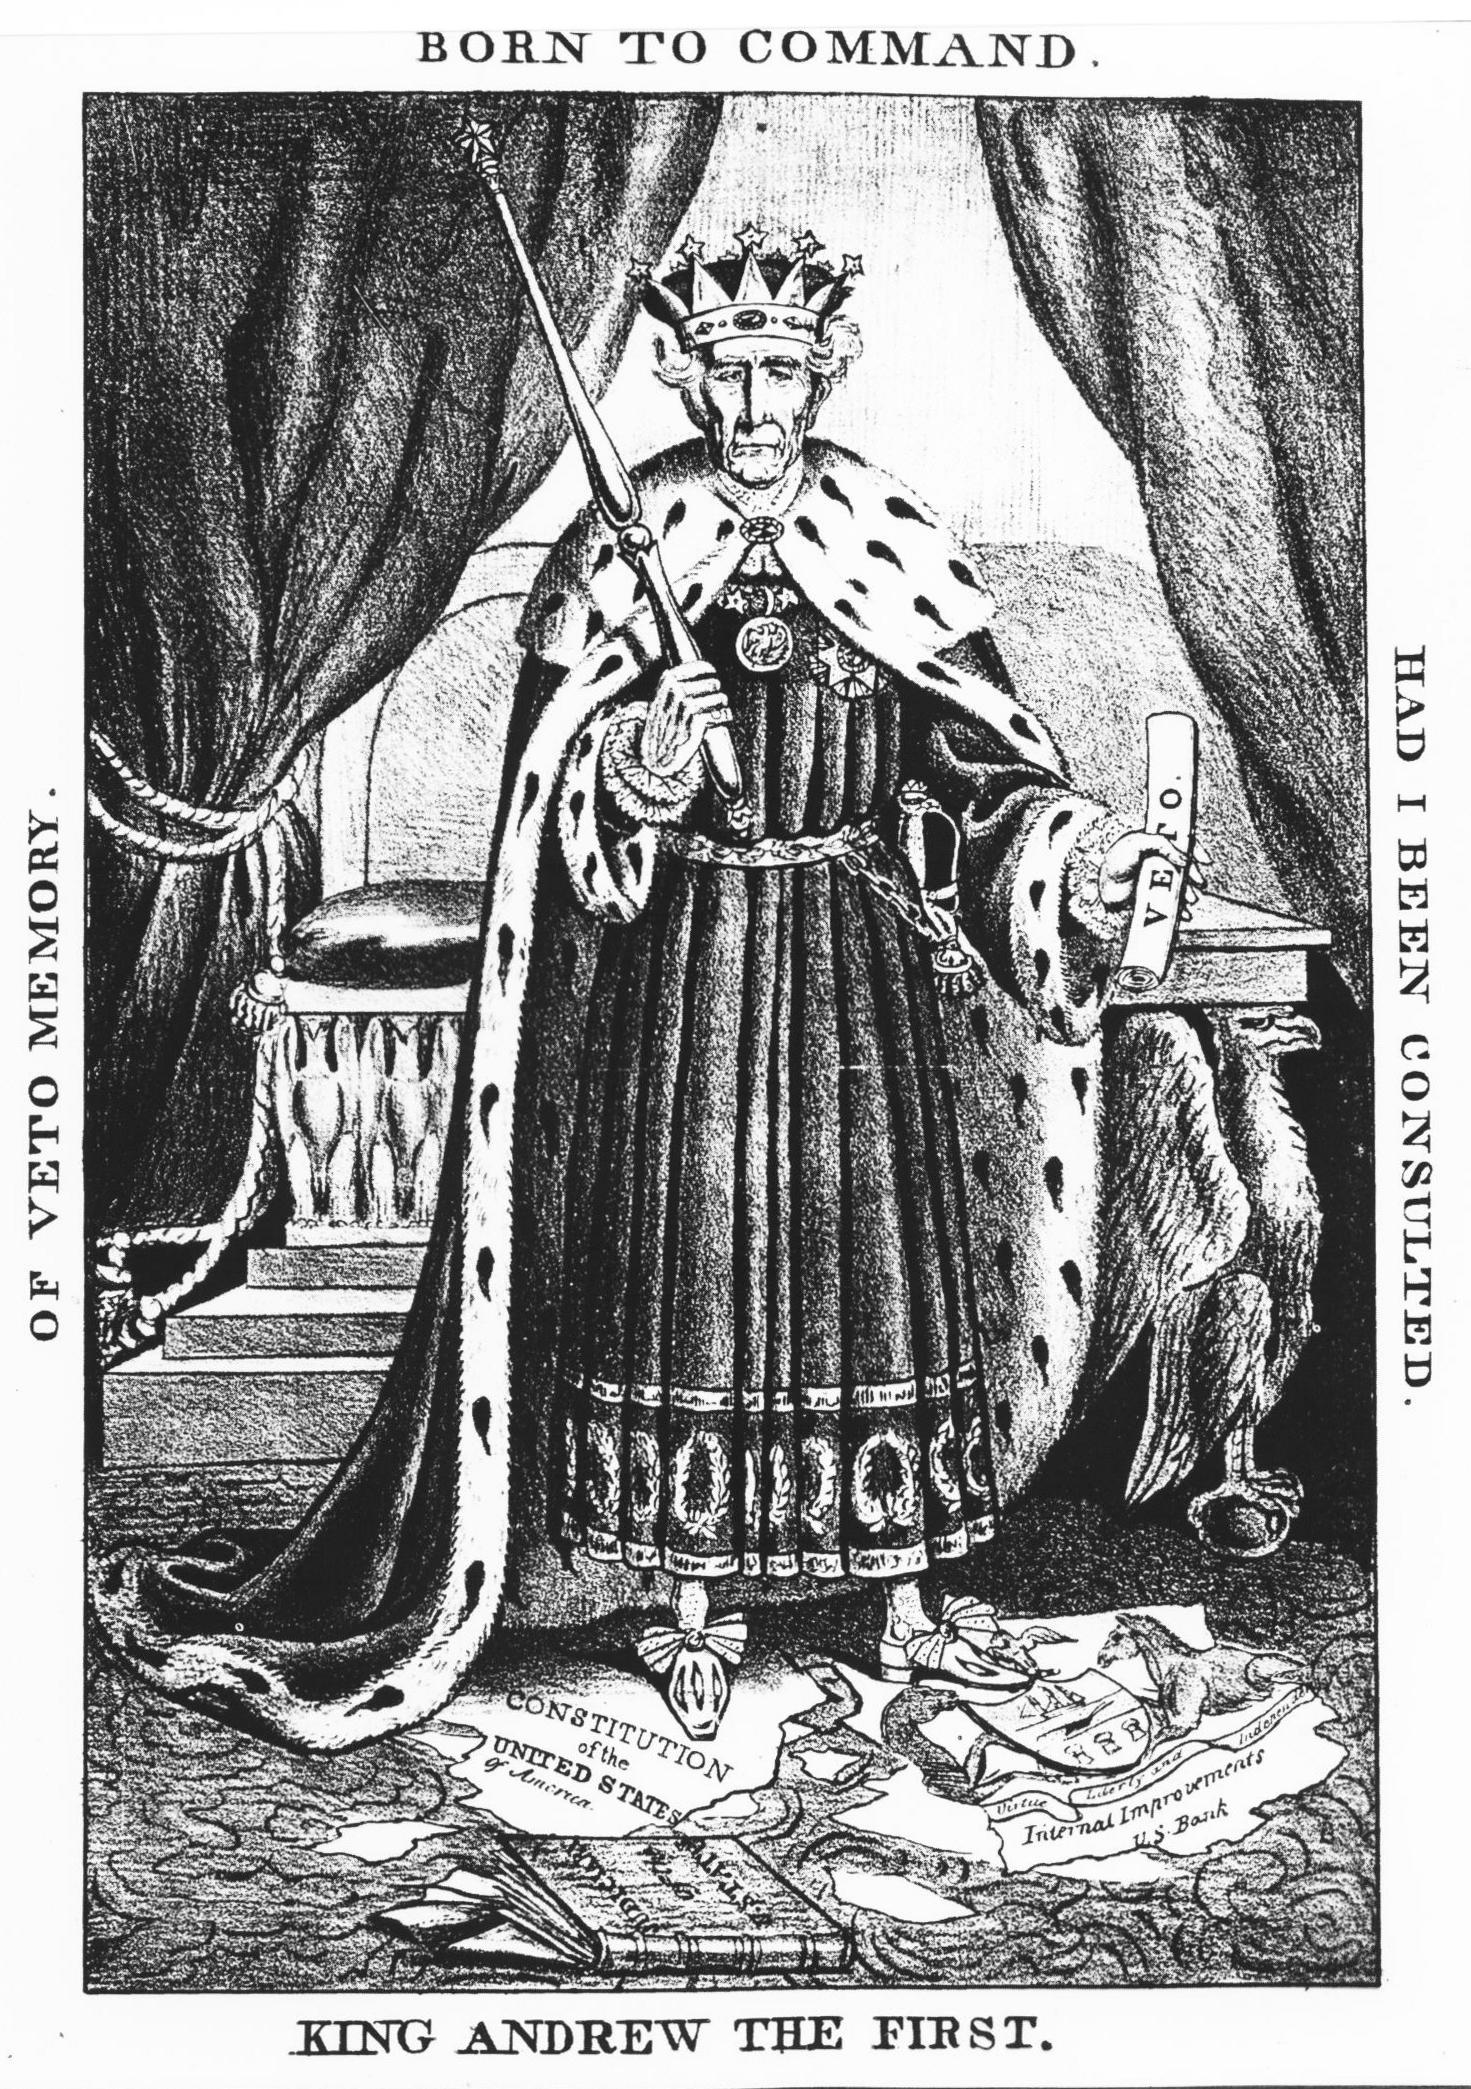 <p>How does this cartoon demonstrate that Andrew Jackson is acting like a King and not a President?</p>